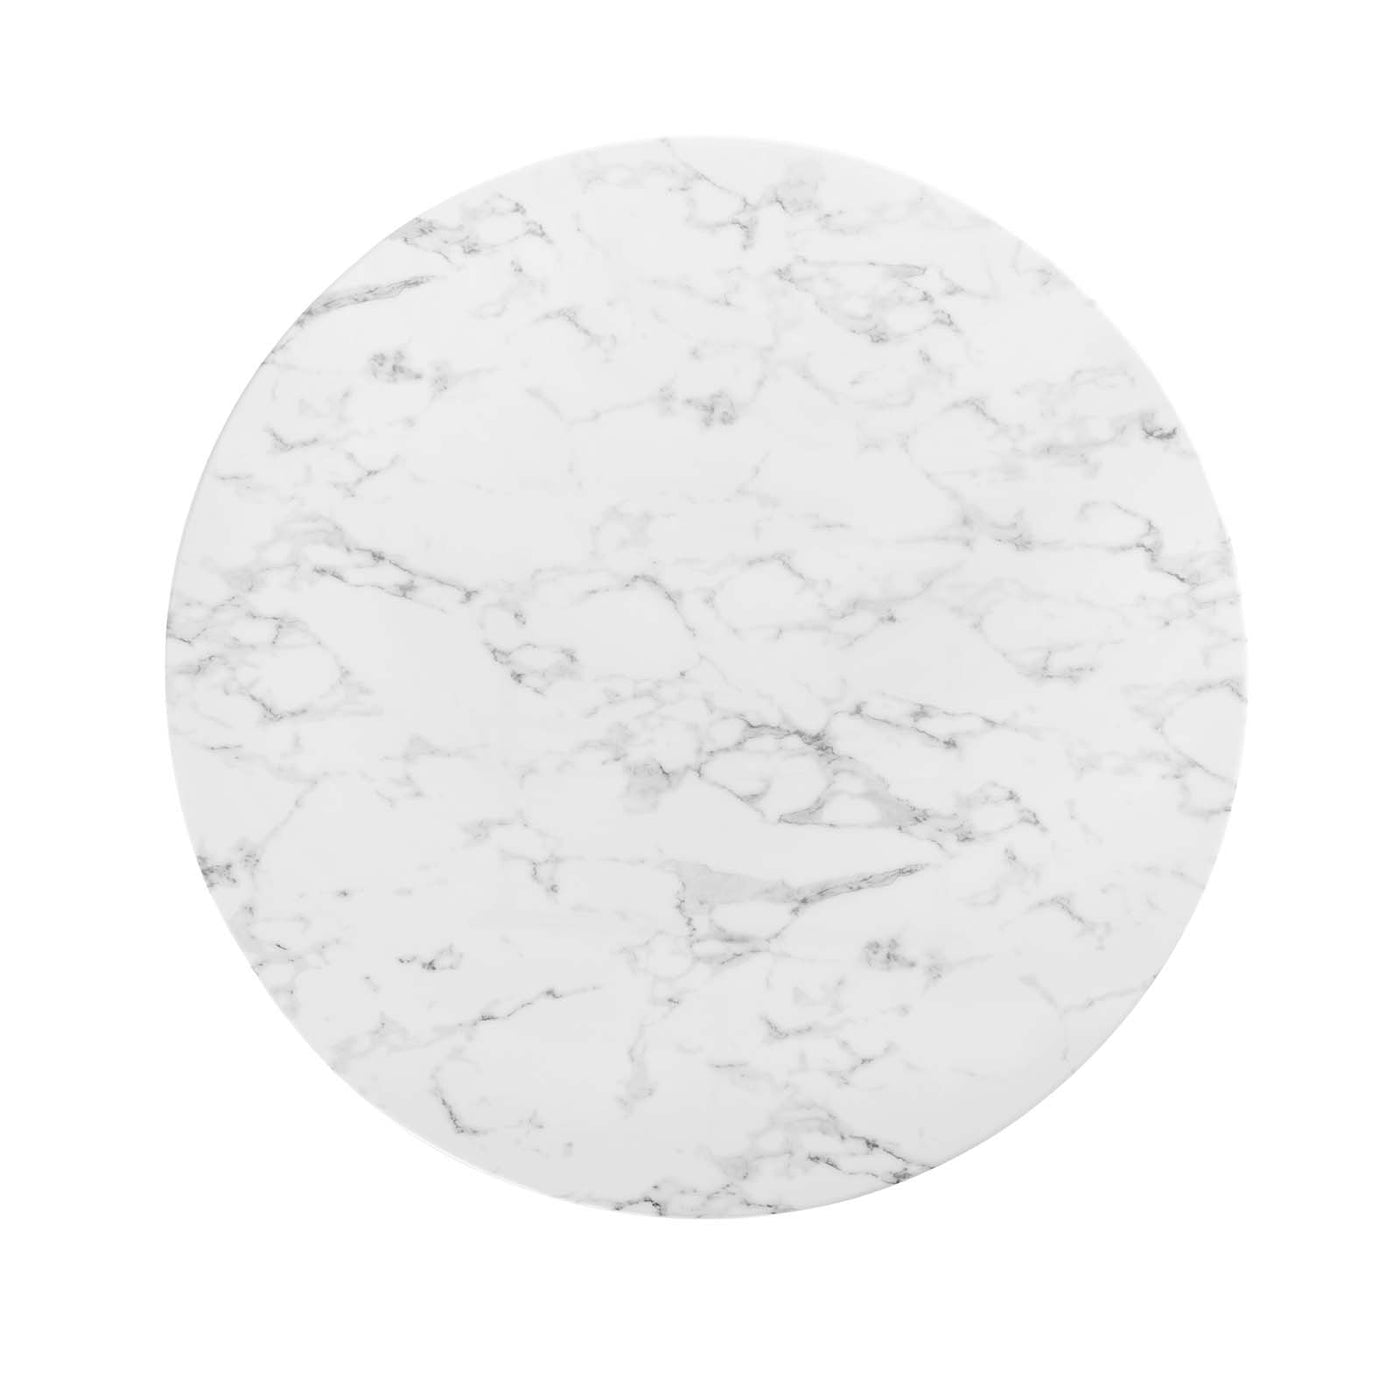 Lippa 48" Round Artificial Marble Dining Table